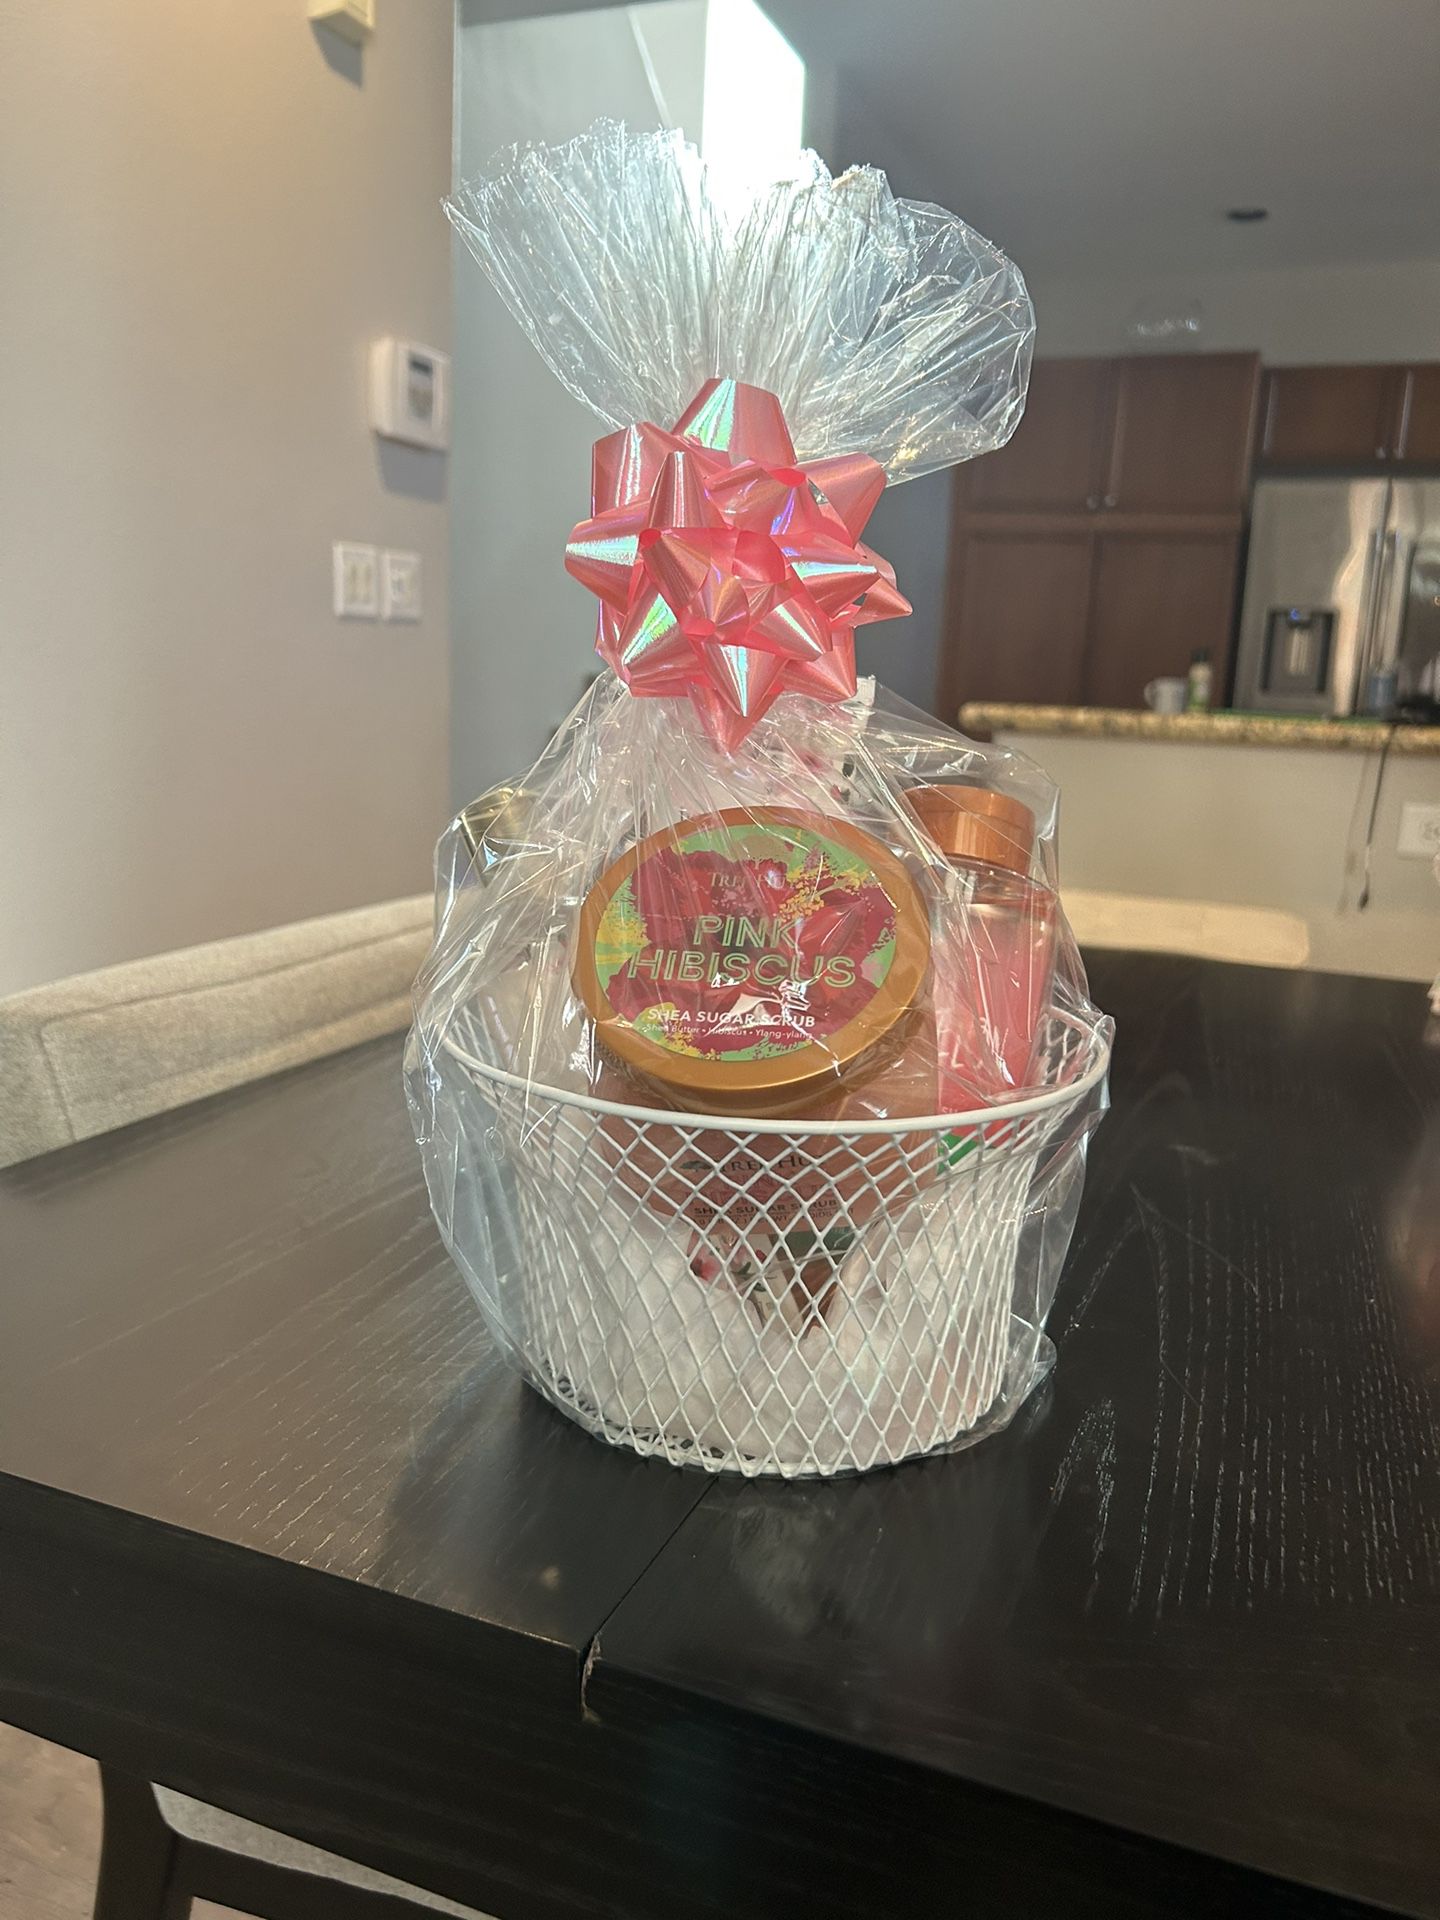 Happy Mother’s Day Gift Basket